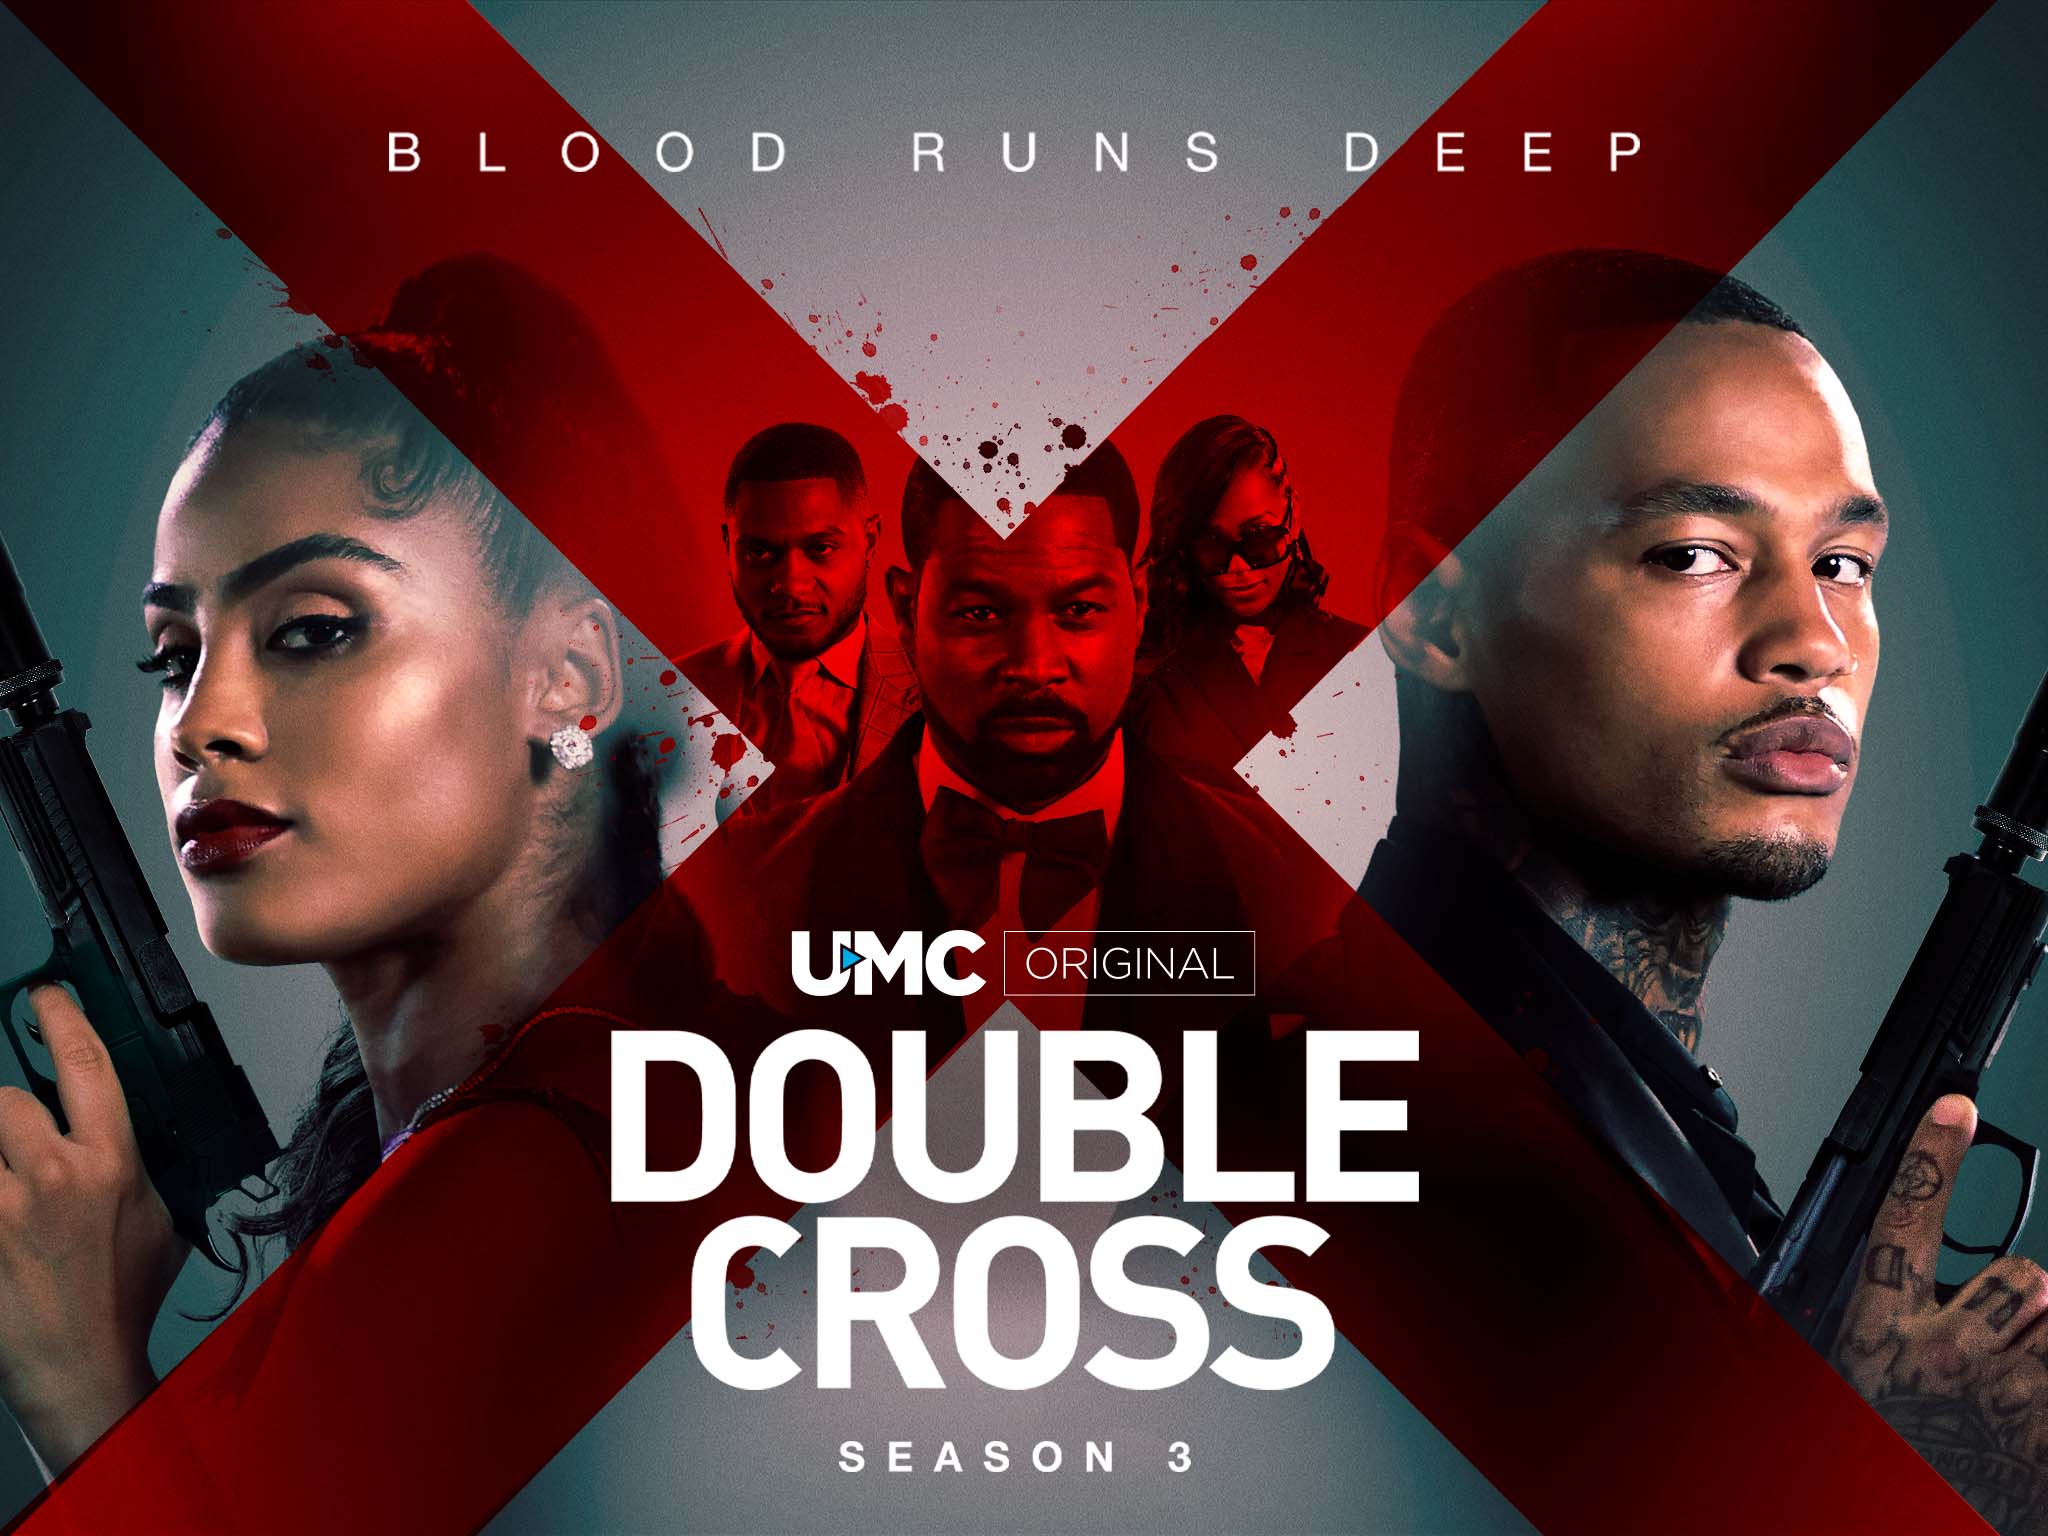 Double Cross Season 4 Release Date And More!